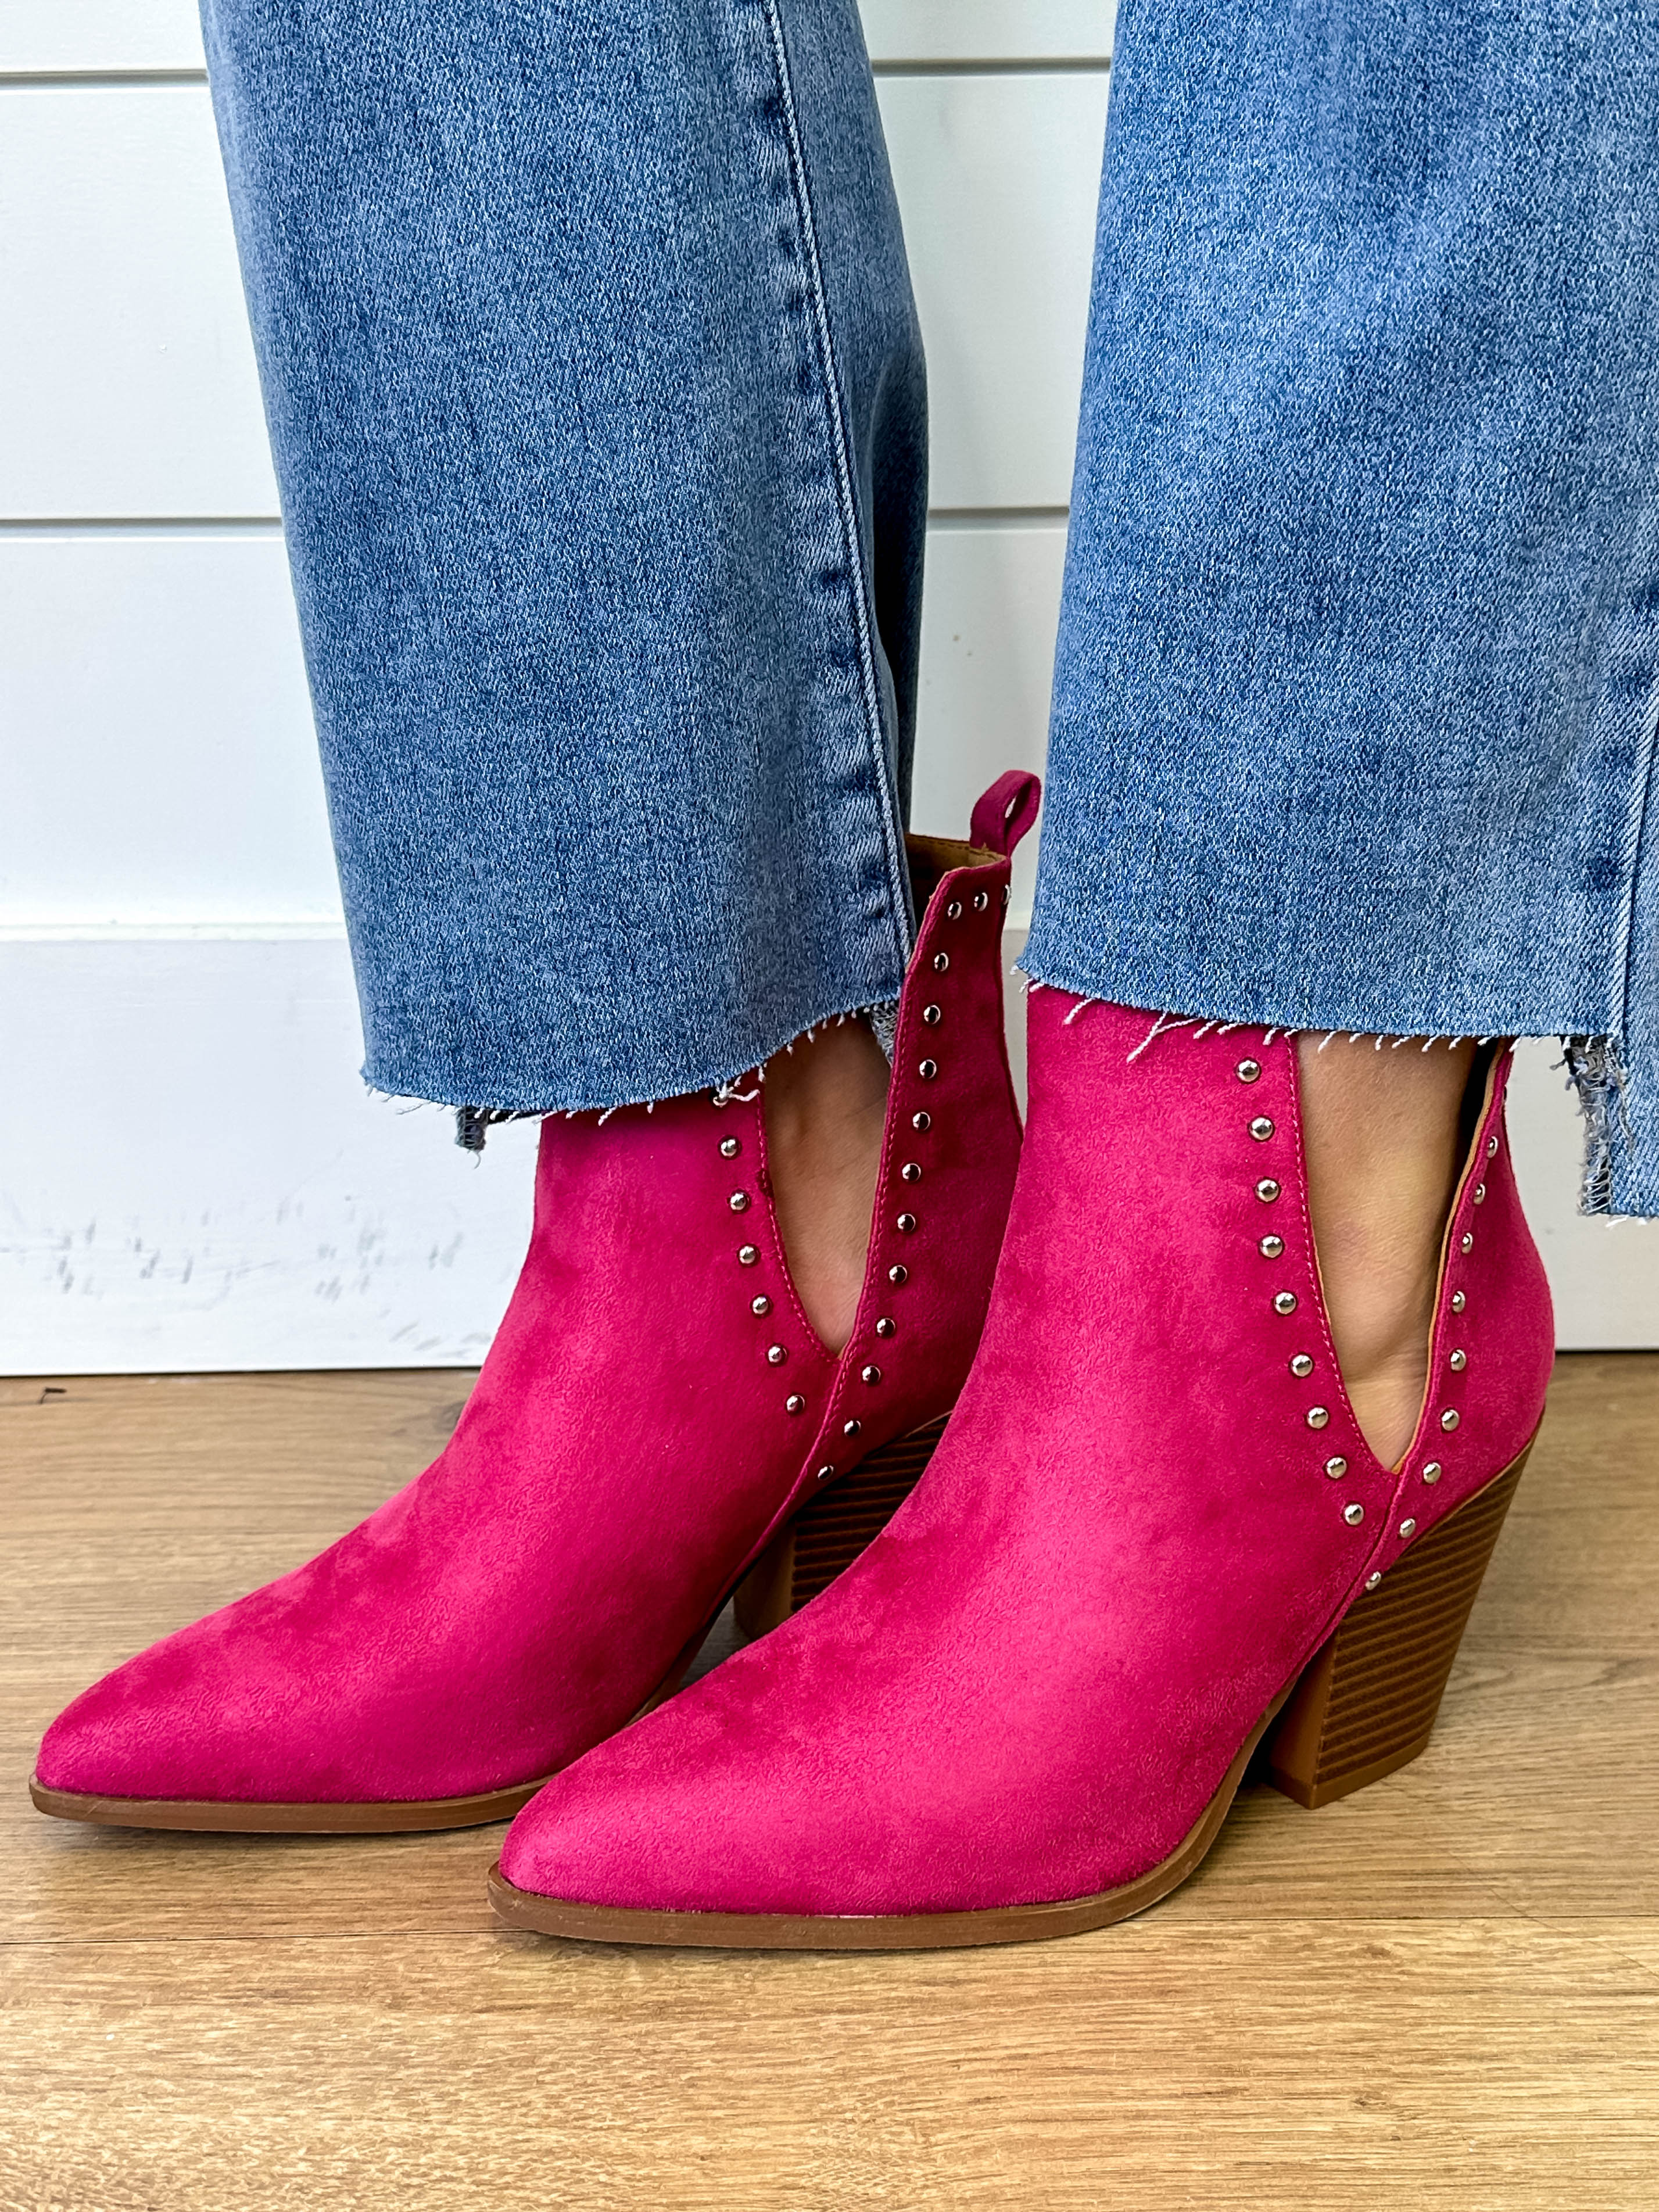 The Ivy Booties in Hot Pink